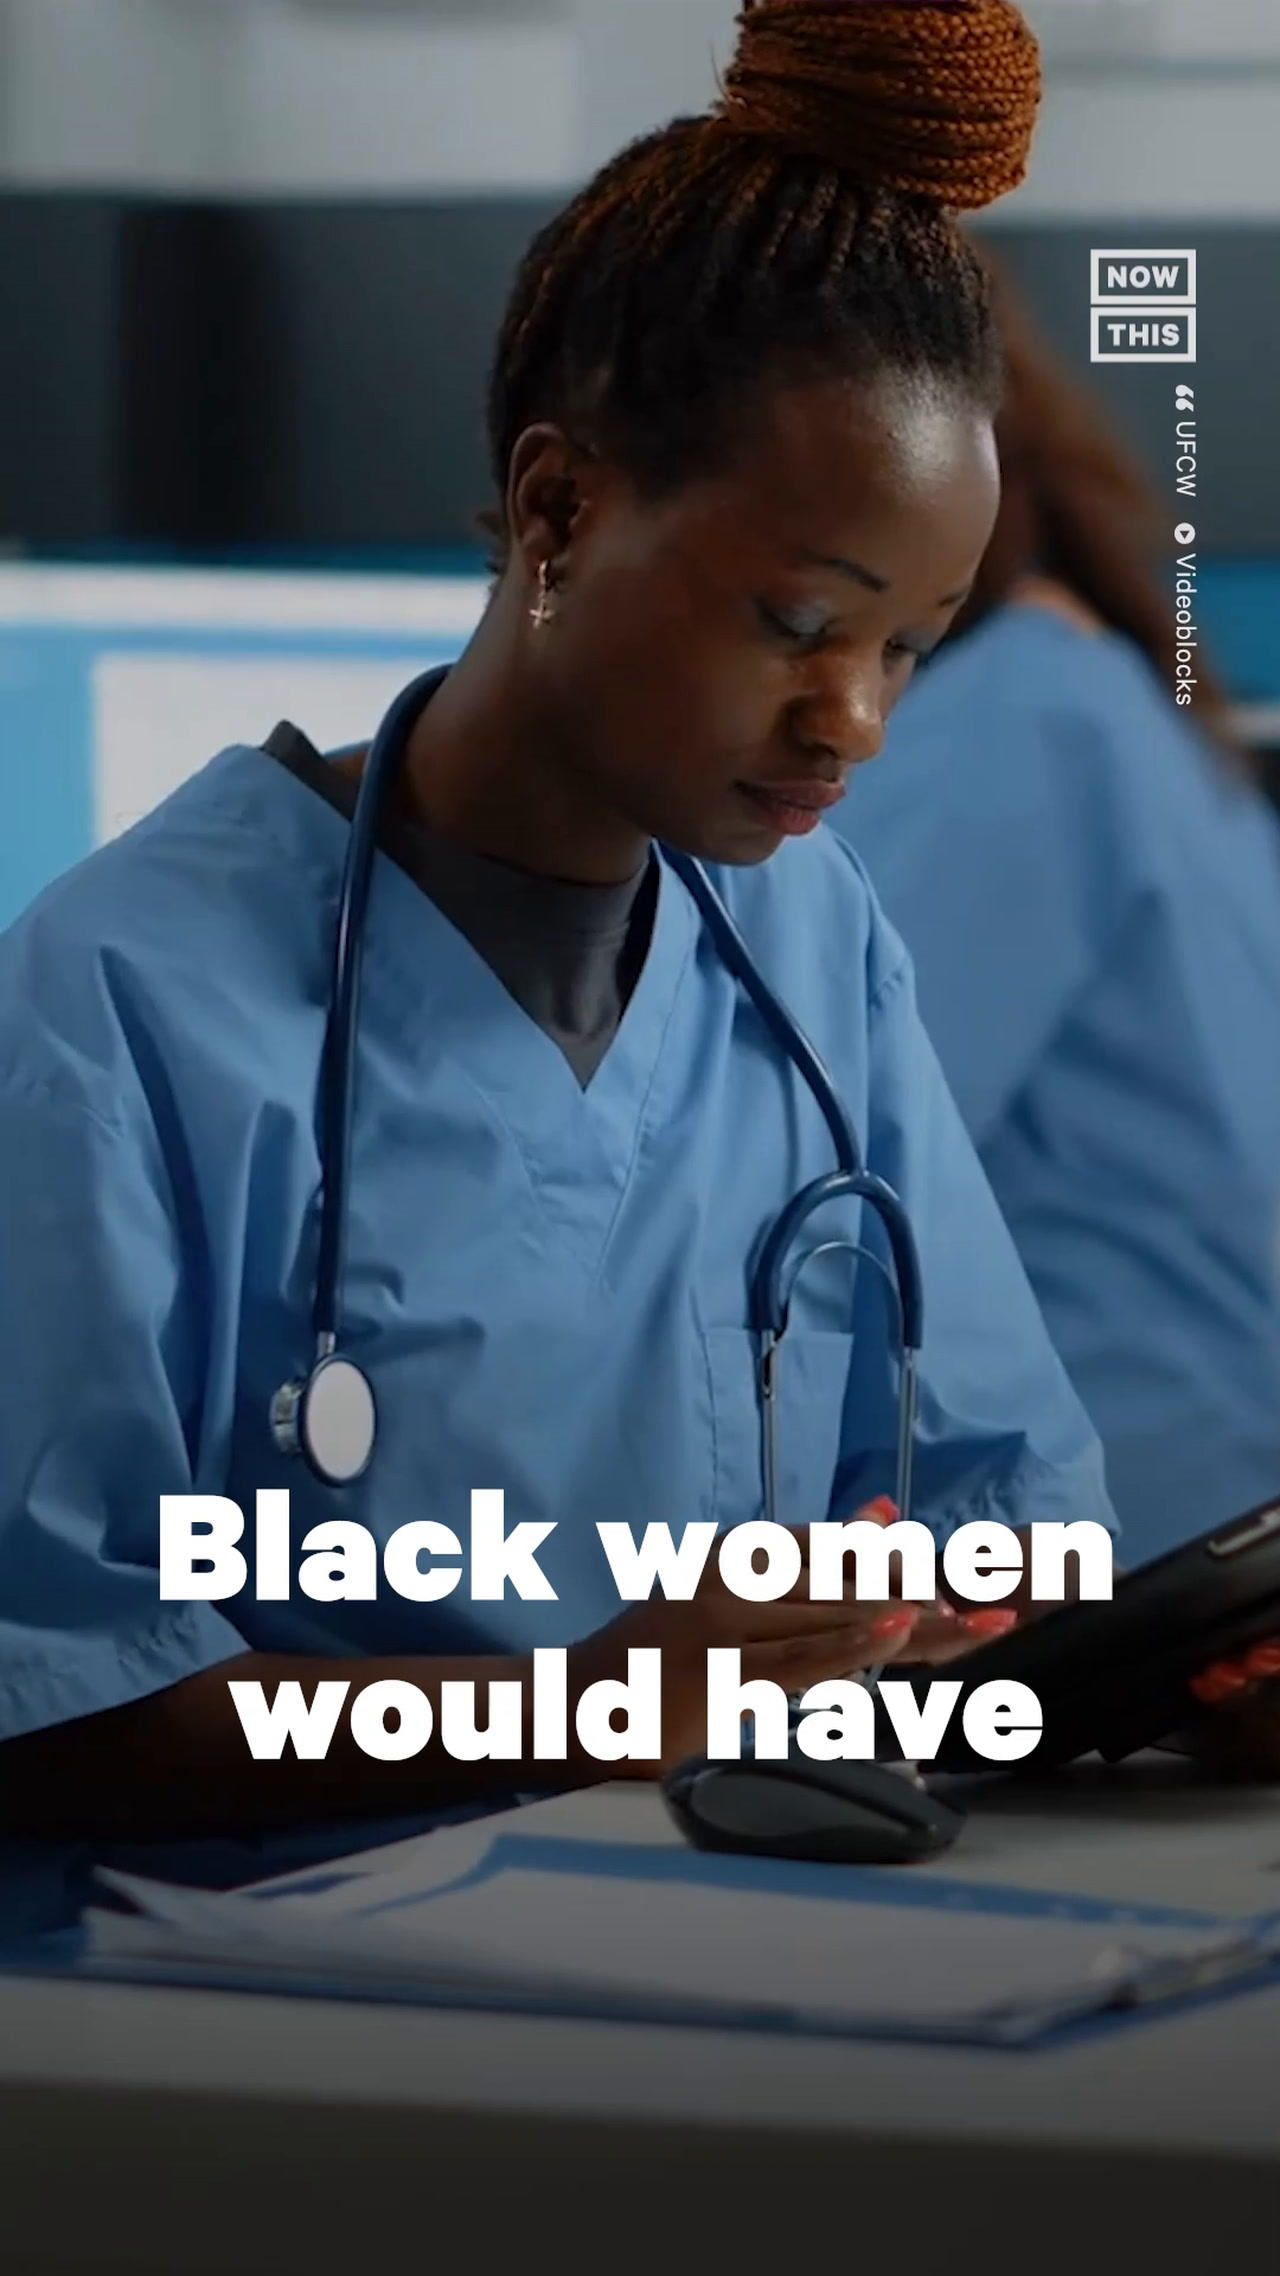 Black Women's Equal Pay Day 2022